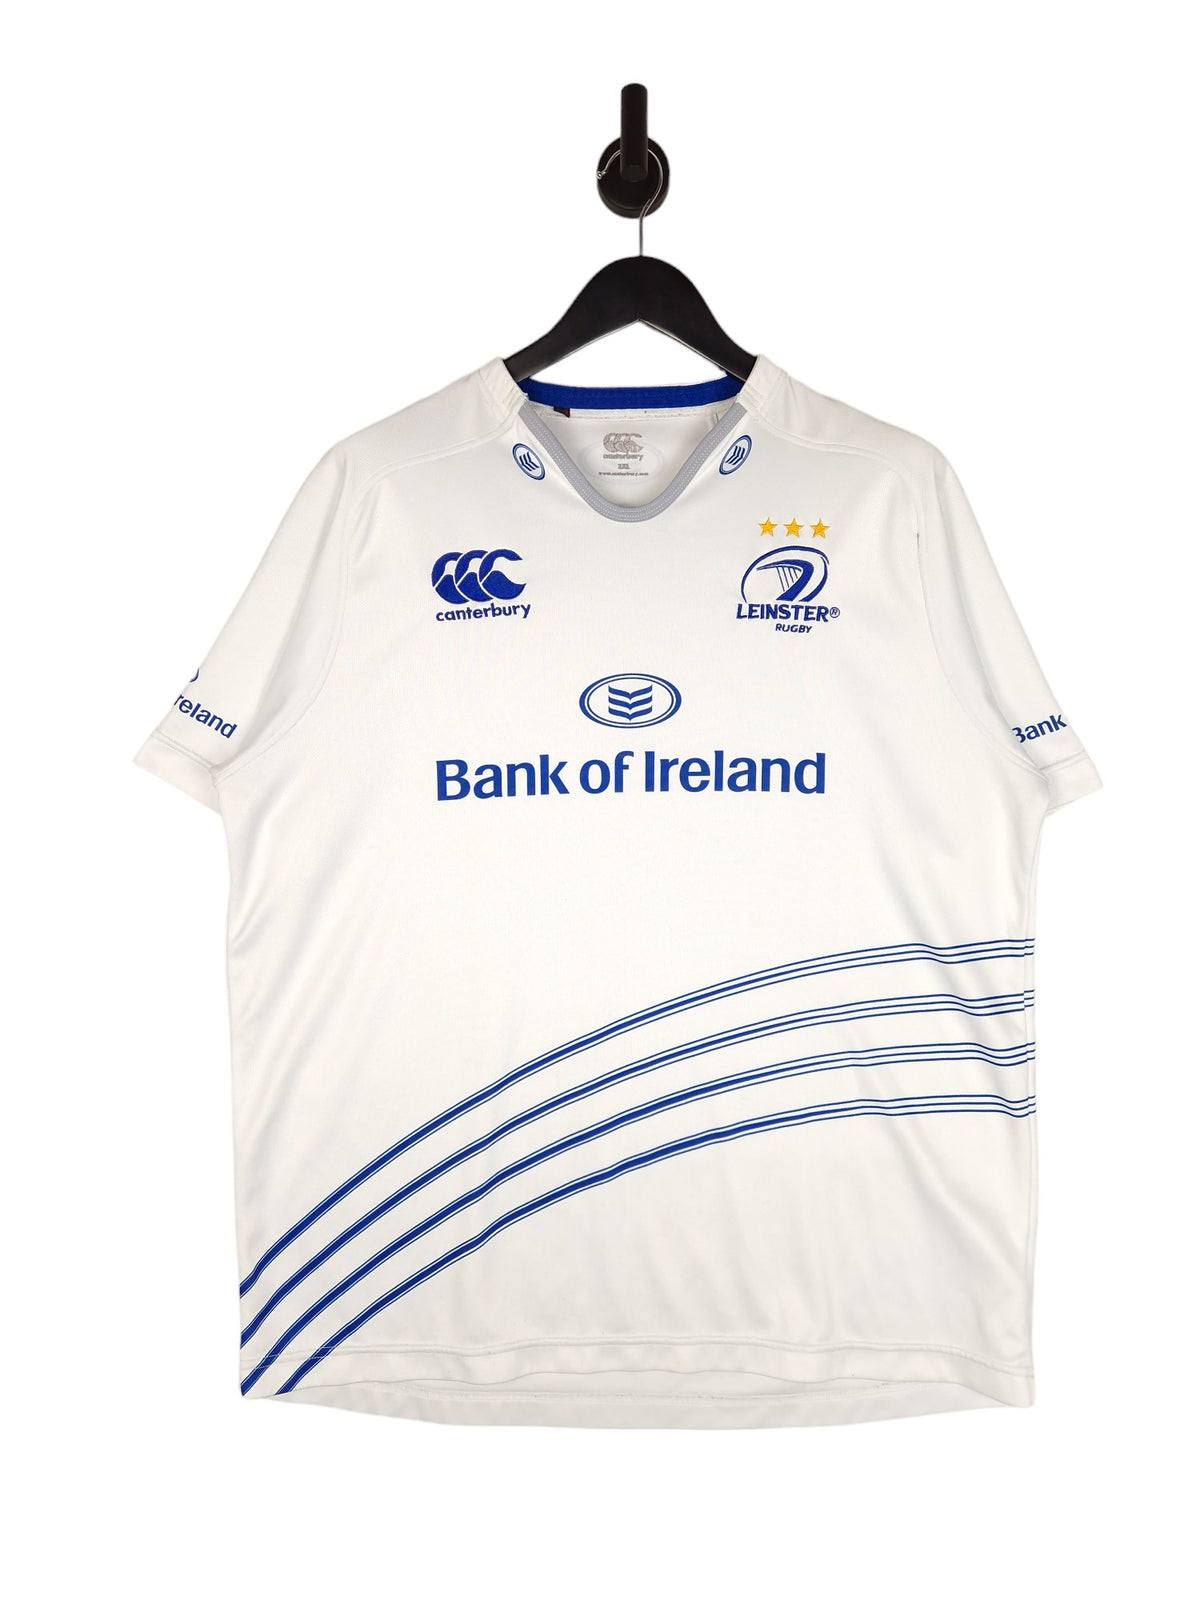 Canterbury Leinster 2013/14 Away Rugby Jersey - Size 2XL